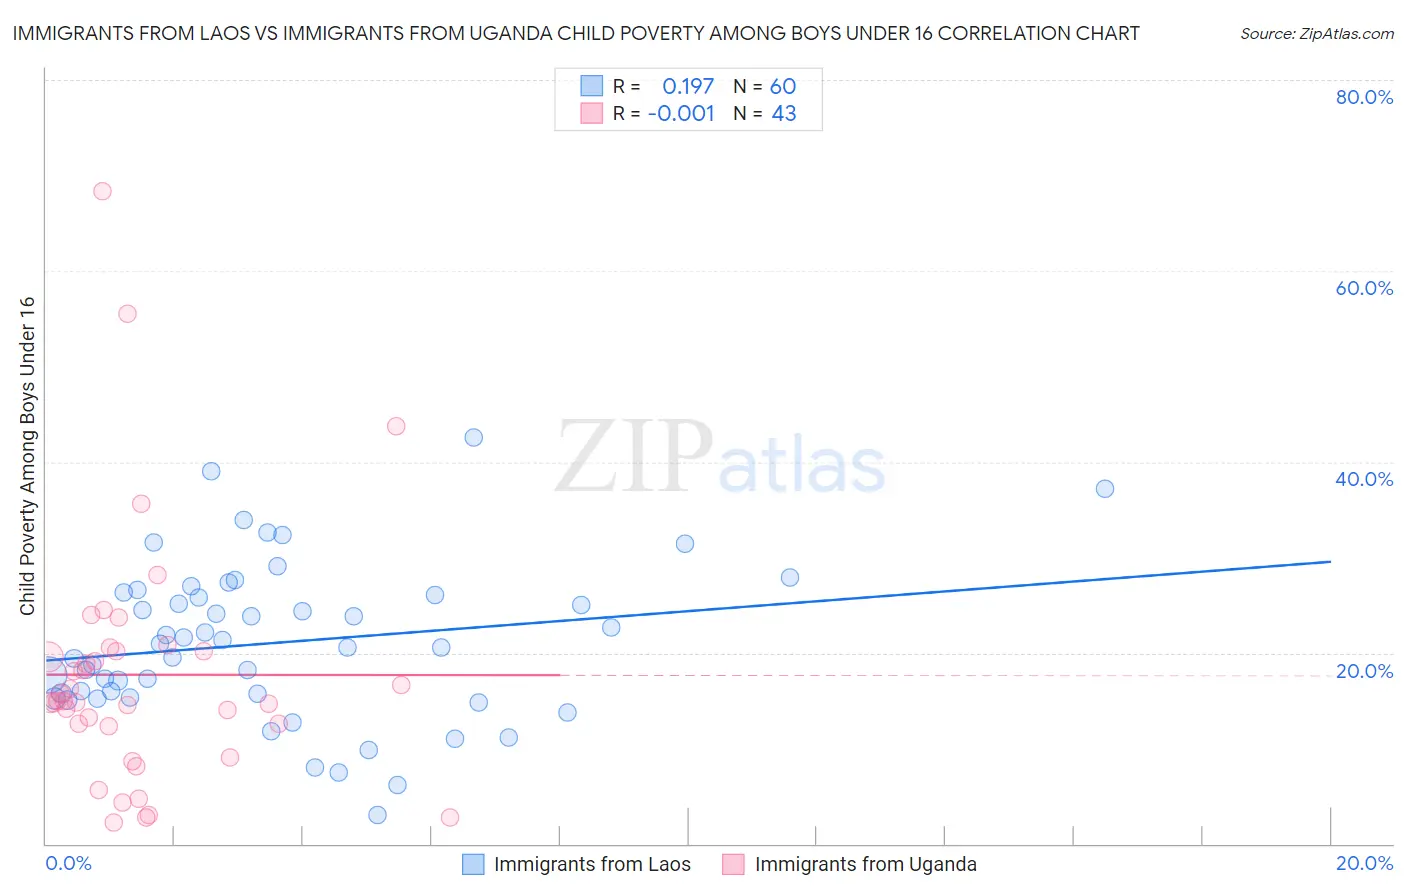 Immigrants from Laos vs Immigrants from Uganda Child Poverty Among Boys Under 16